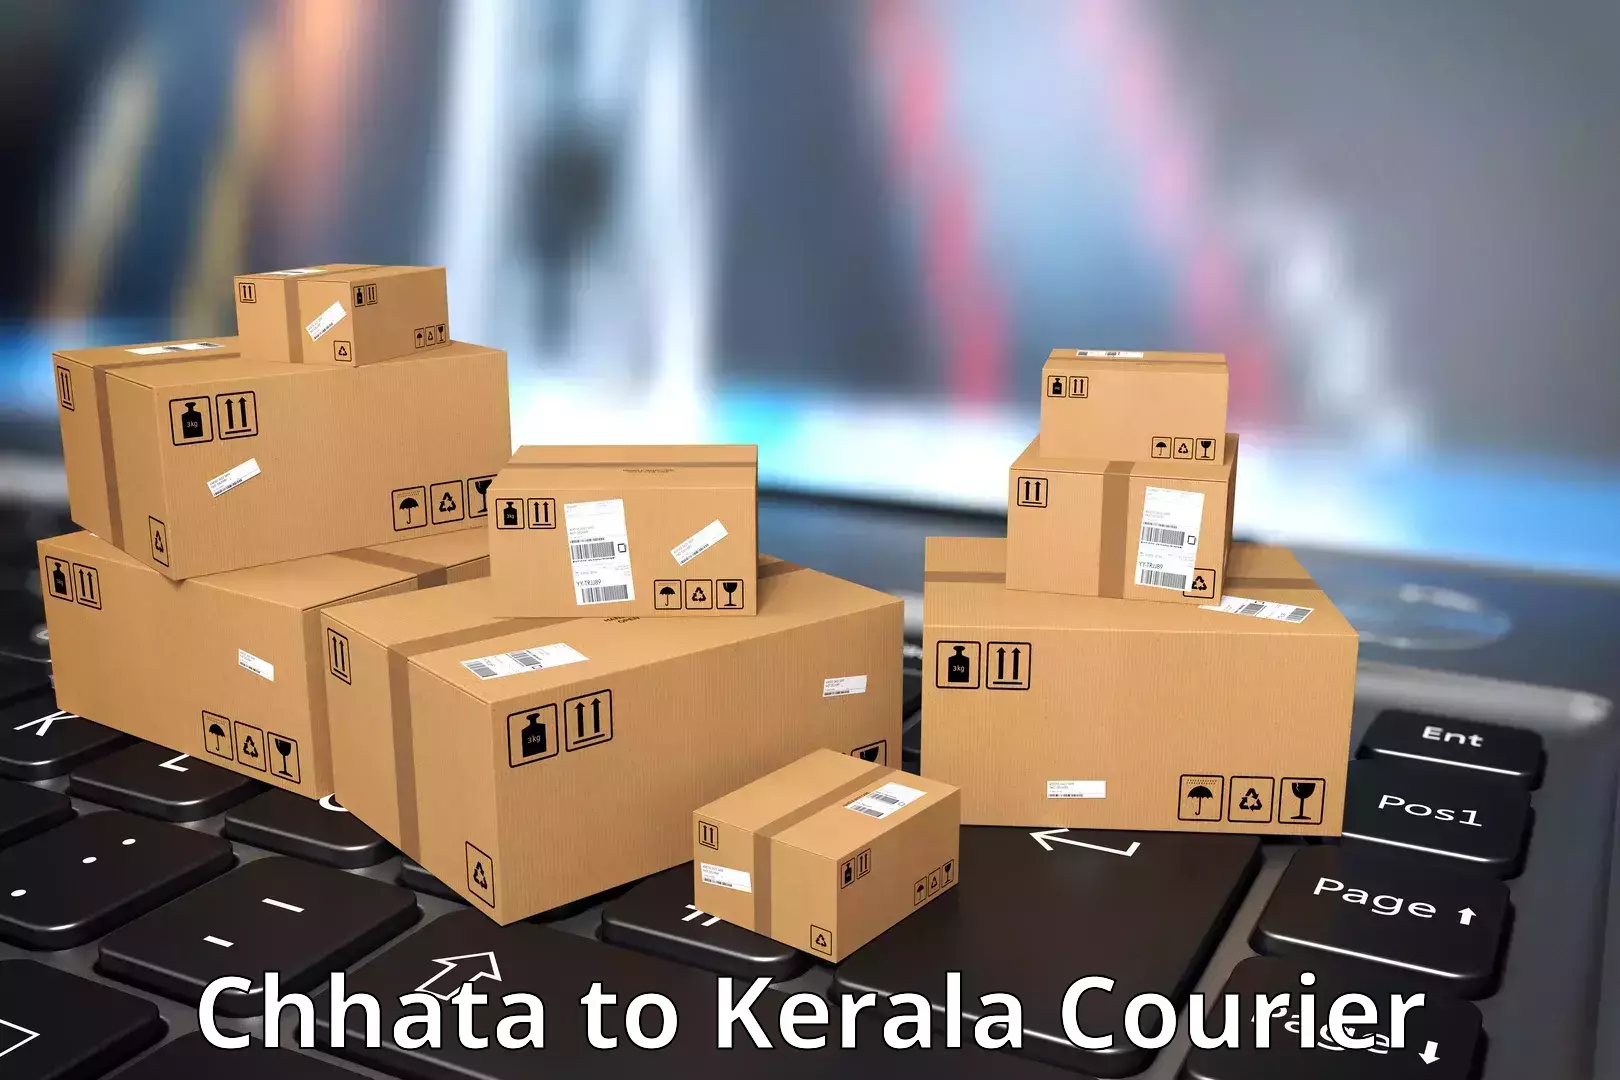 Flexible delivery scheduling Chhata to Kerala